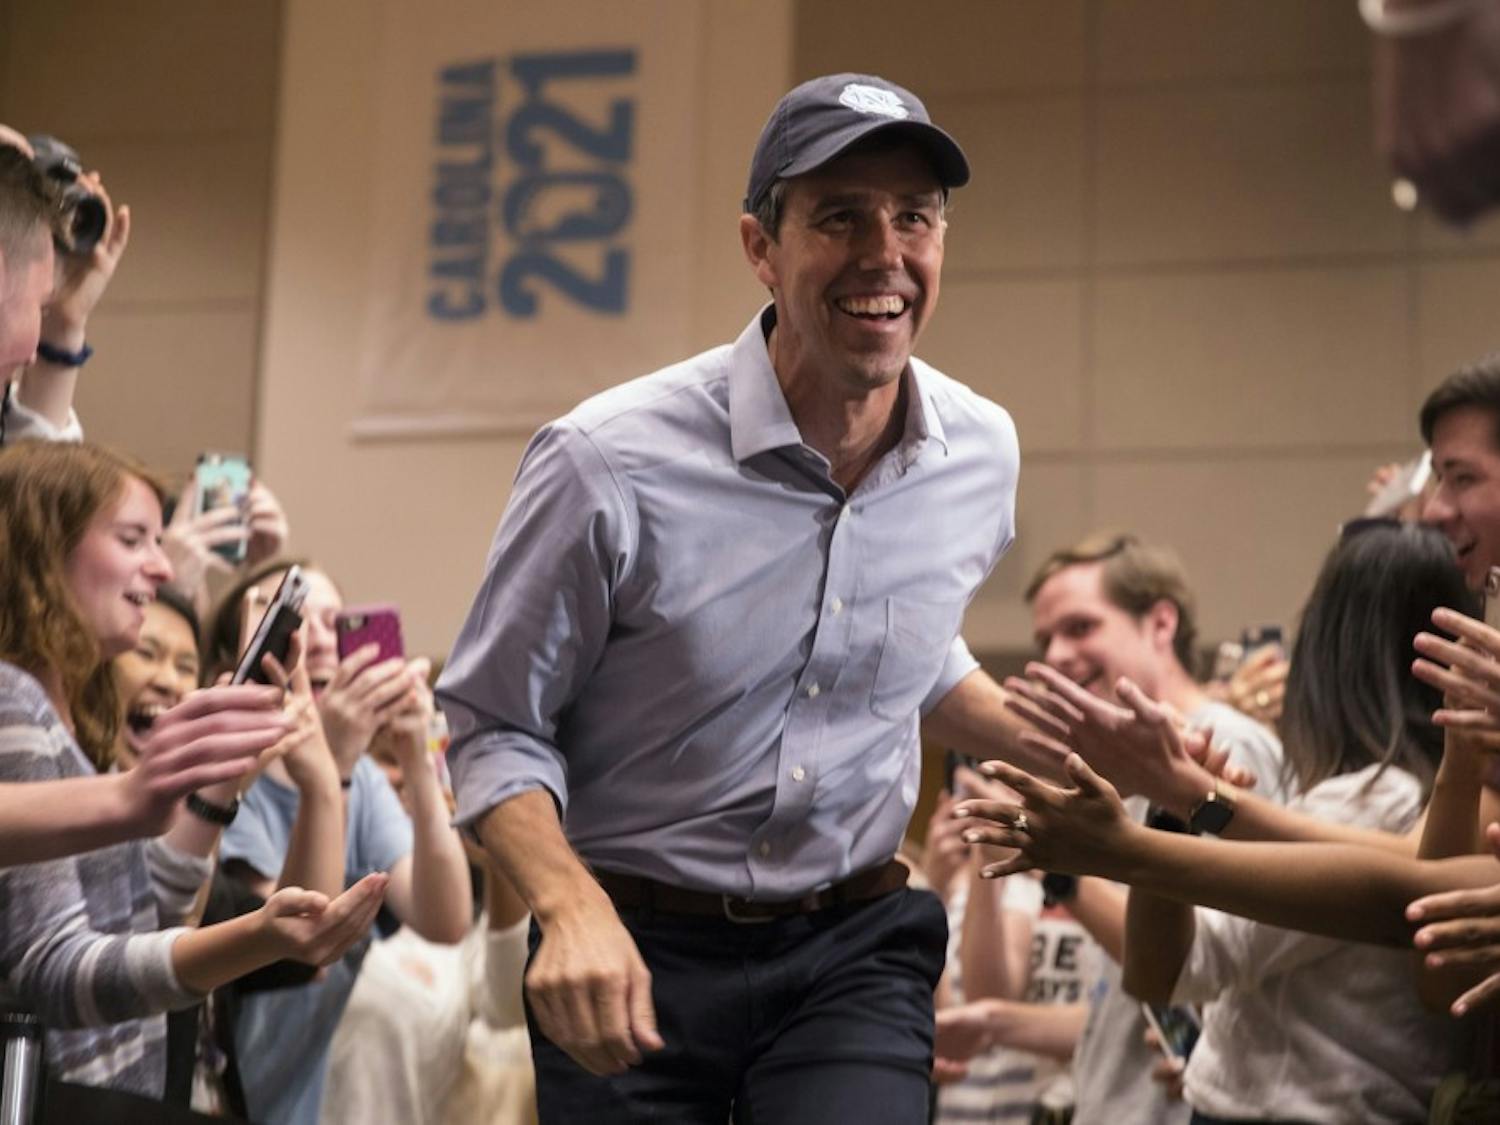 Democratic presidential candidate Beto O'Rourke comes to UNC's campus